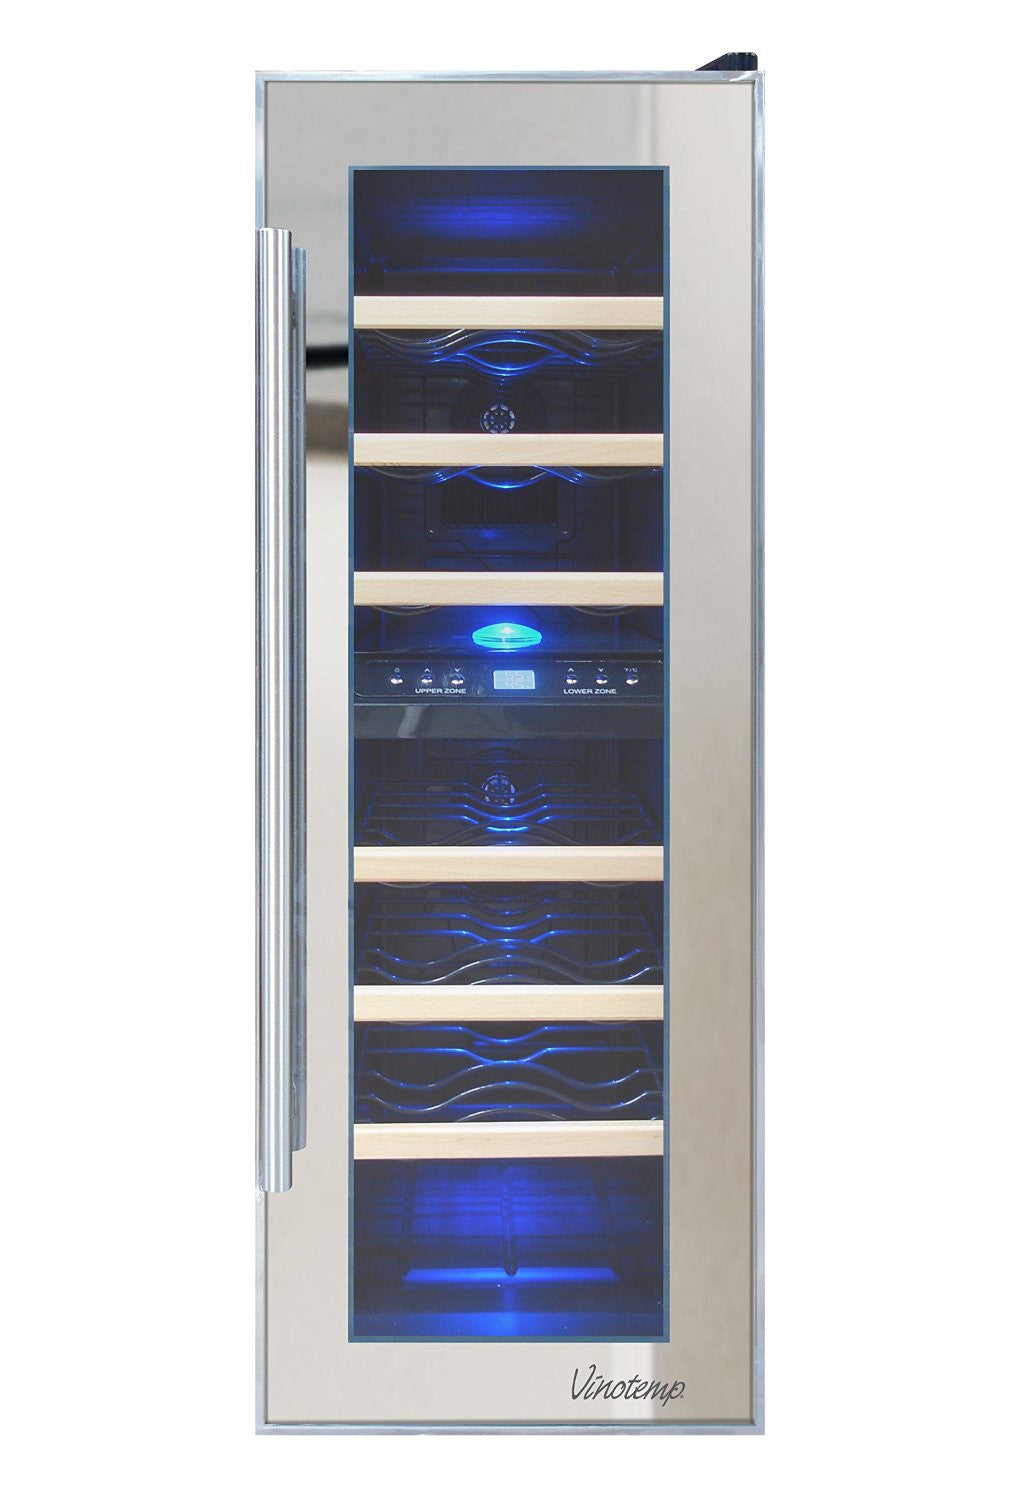 Vinotemp Vt-21tsp-2z 21-bottle Dual-zone Thermoelectric Mirrored Wine Cooler